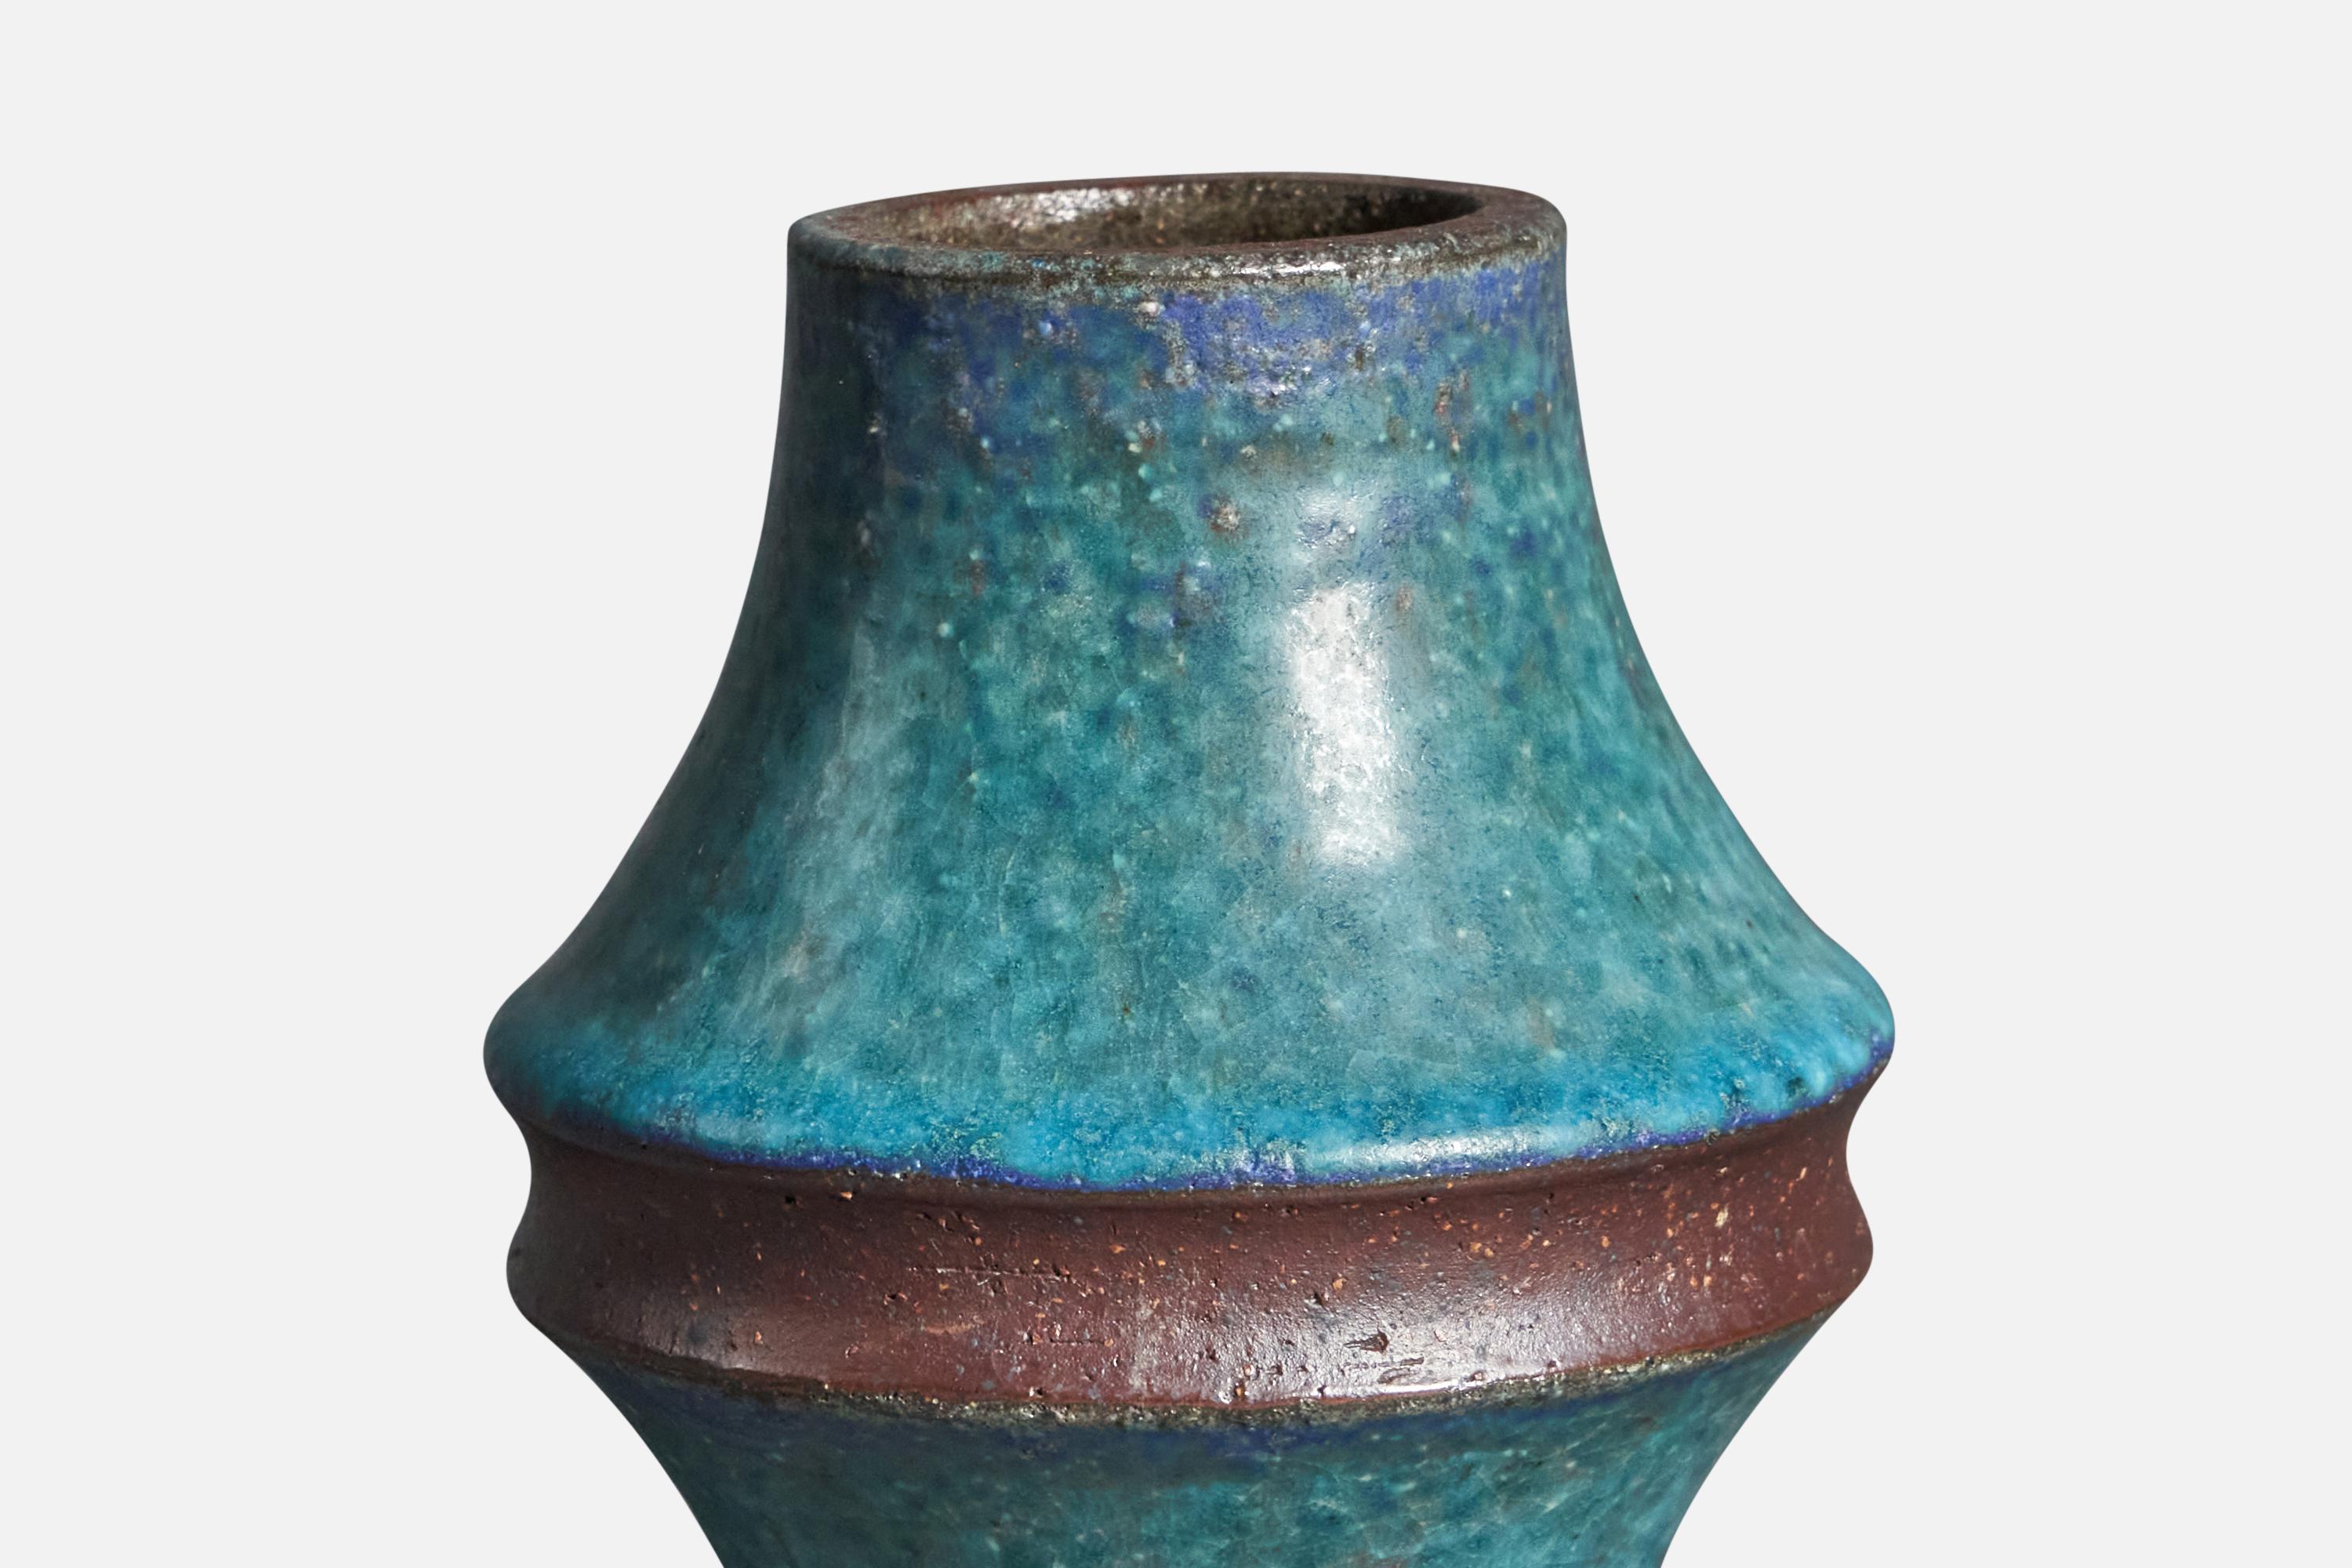 A blue-glazed stoneware vase, designed by Marianne Starck and produced by Michael Andersen, Bornholm, Denmark, c. 1960s.